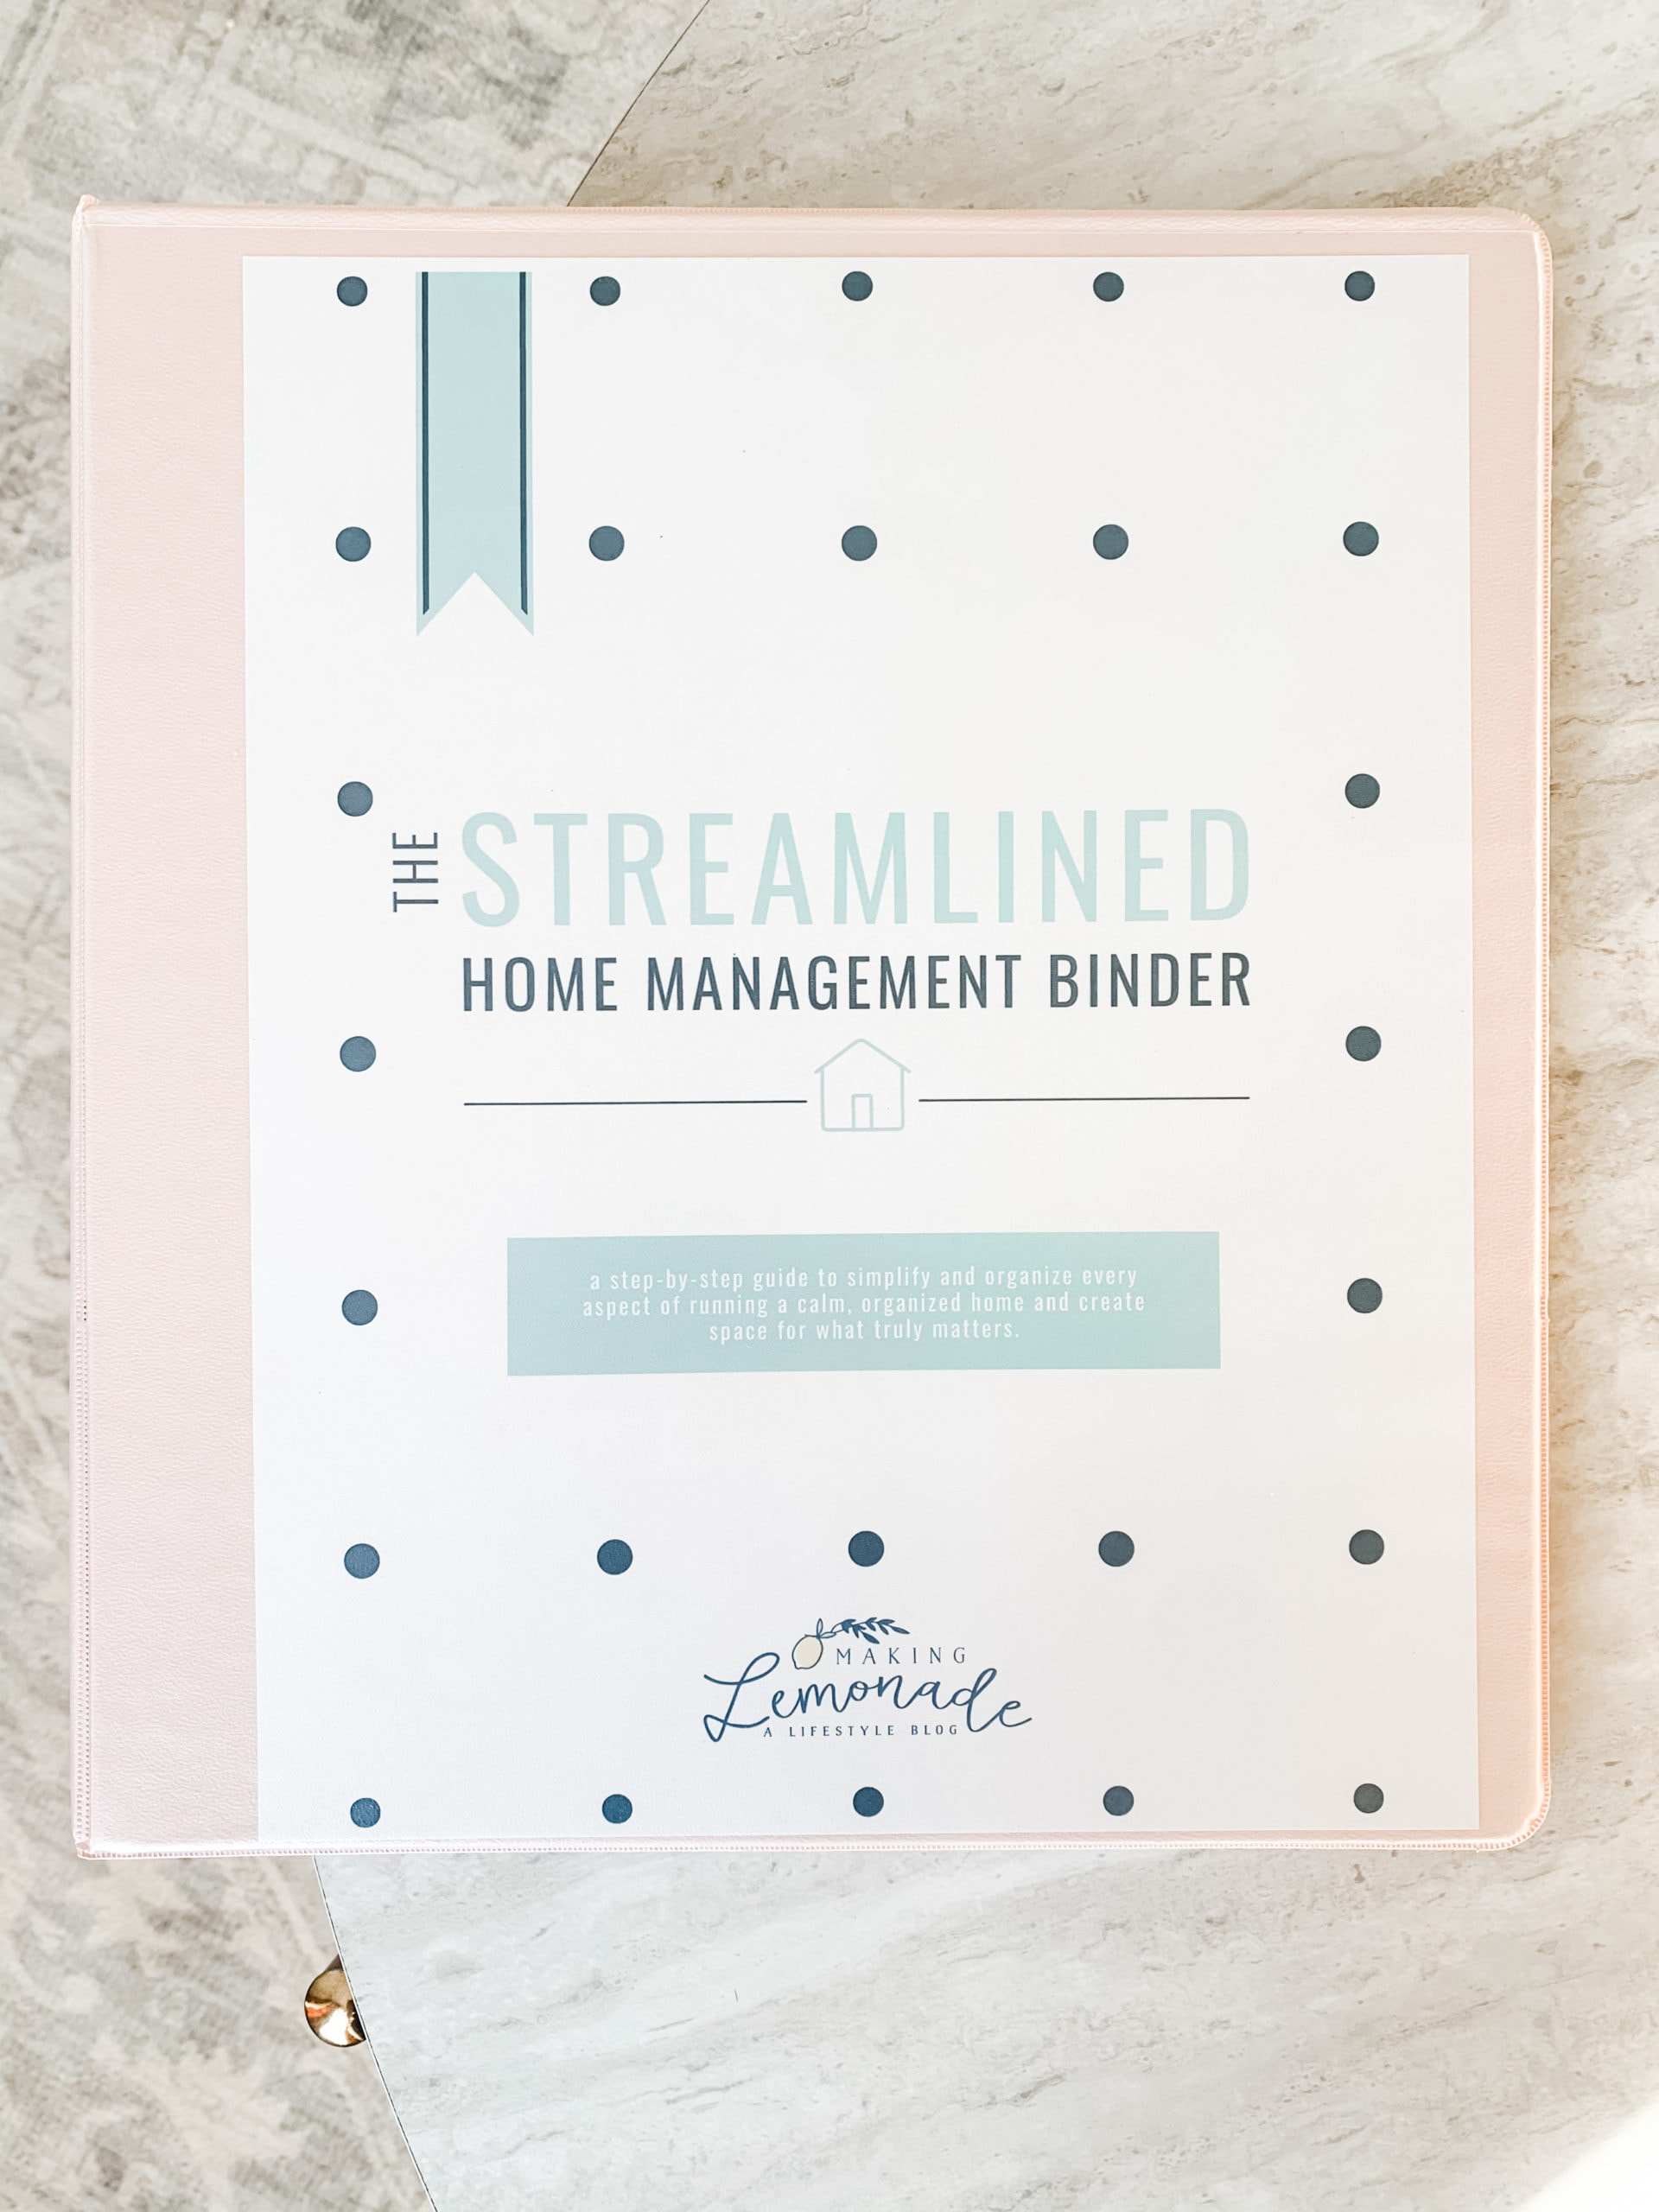 streamlined home binder on table